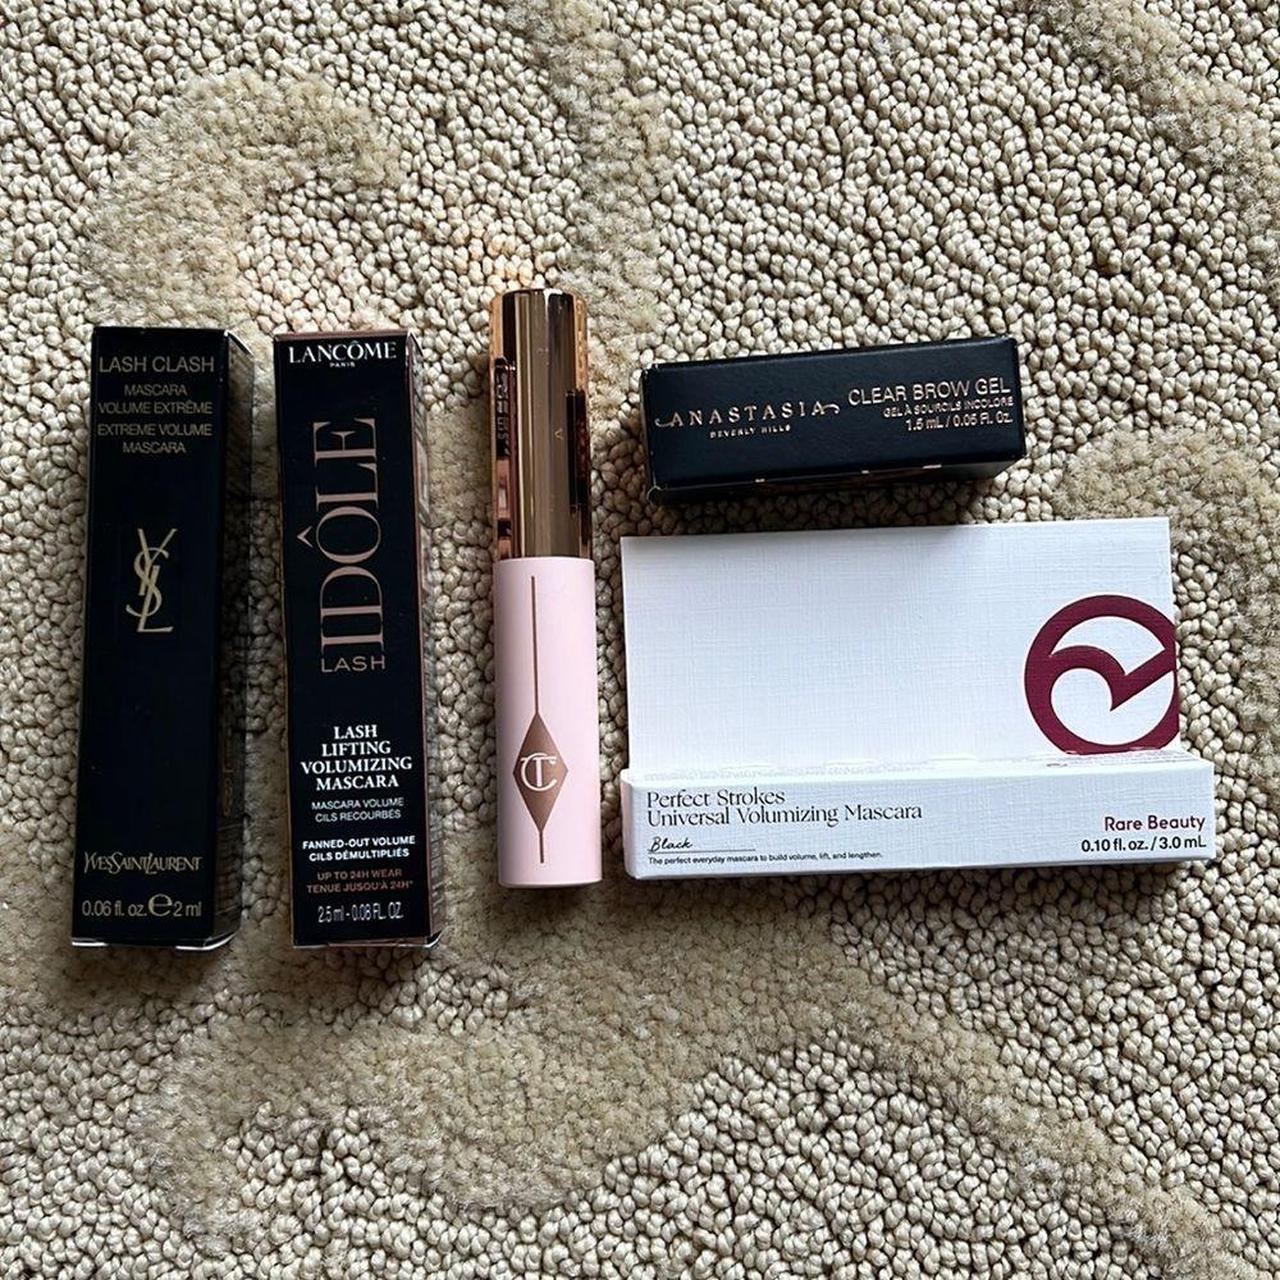 Deluxe/travel sized mascara assortment. All